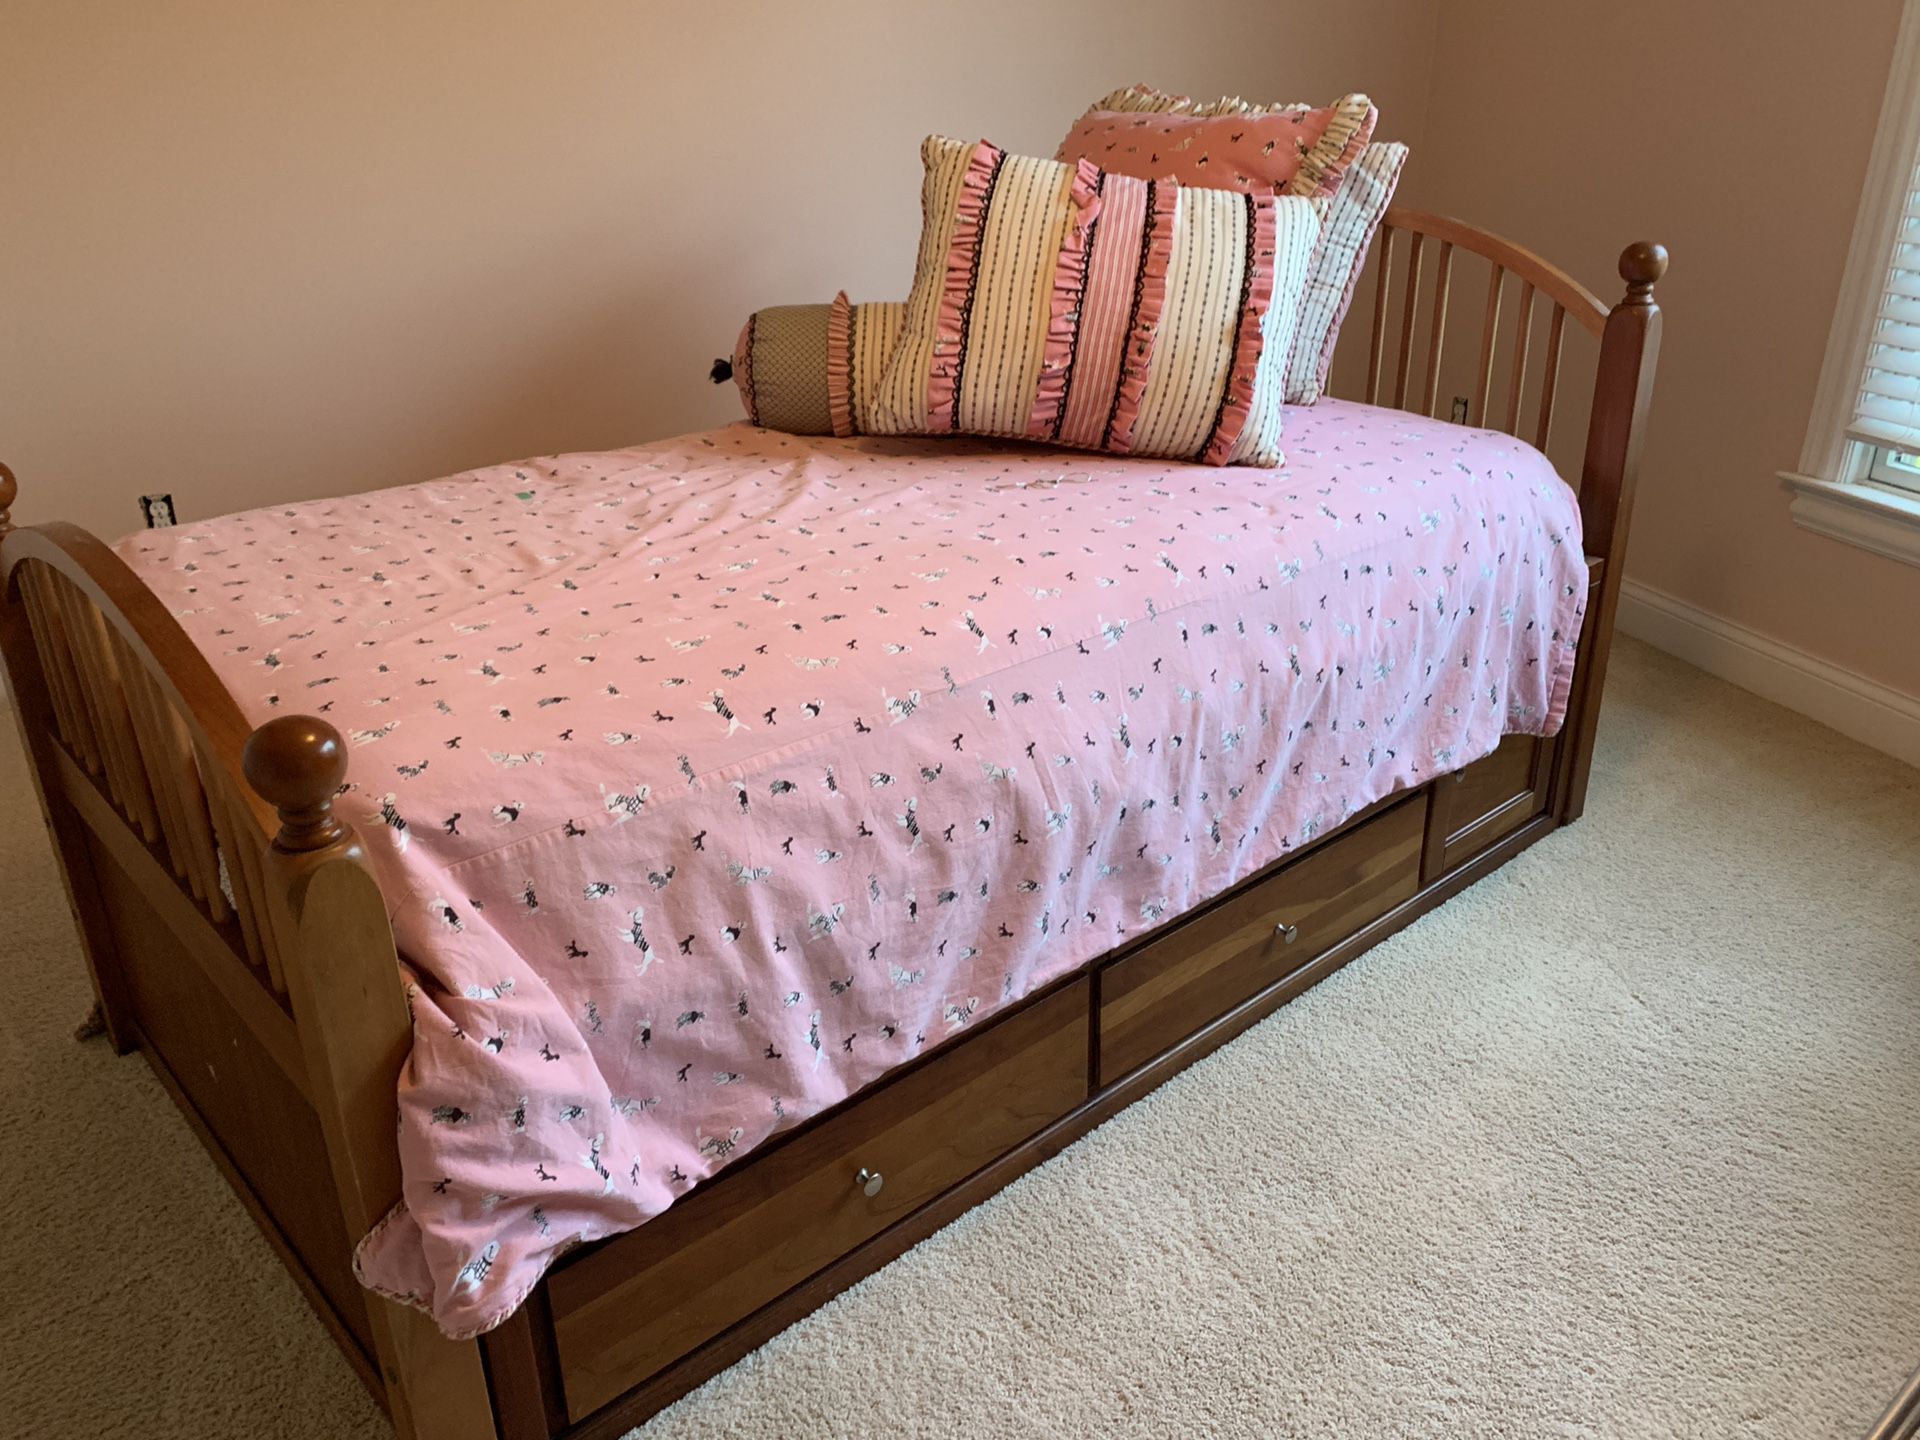 Stanley Furniture solid wood twin bed with headboard, footboard and drawers underneath